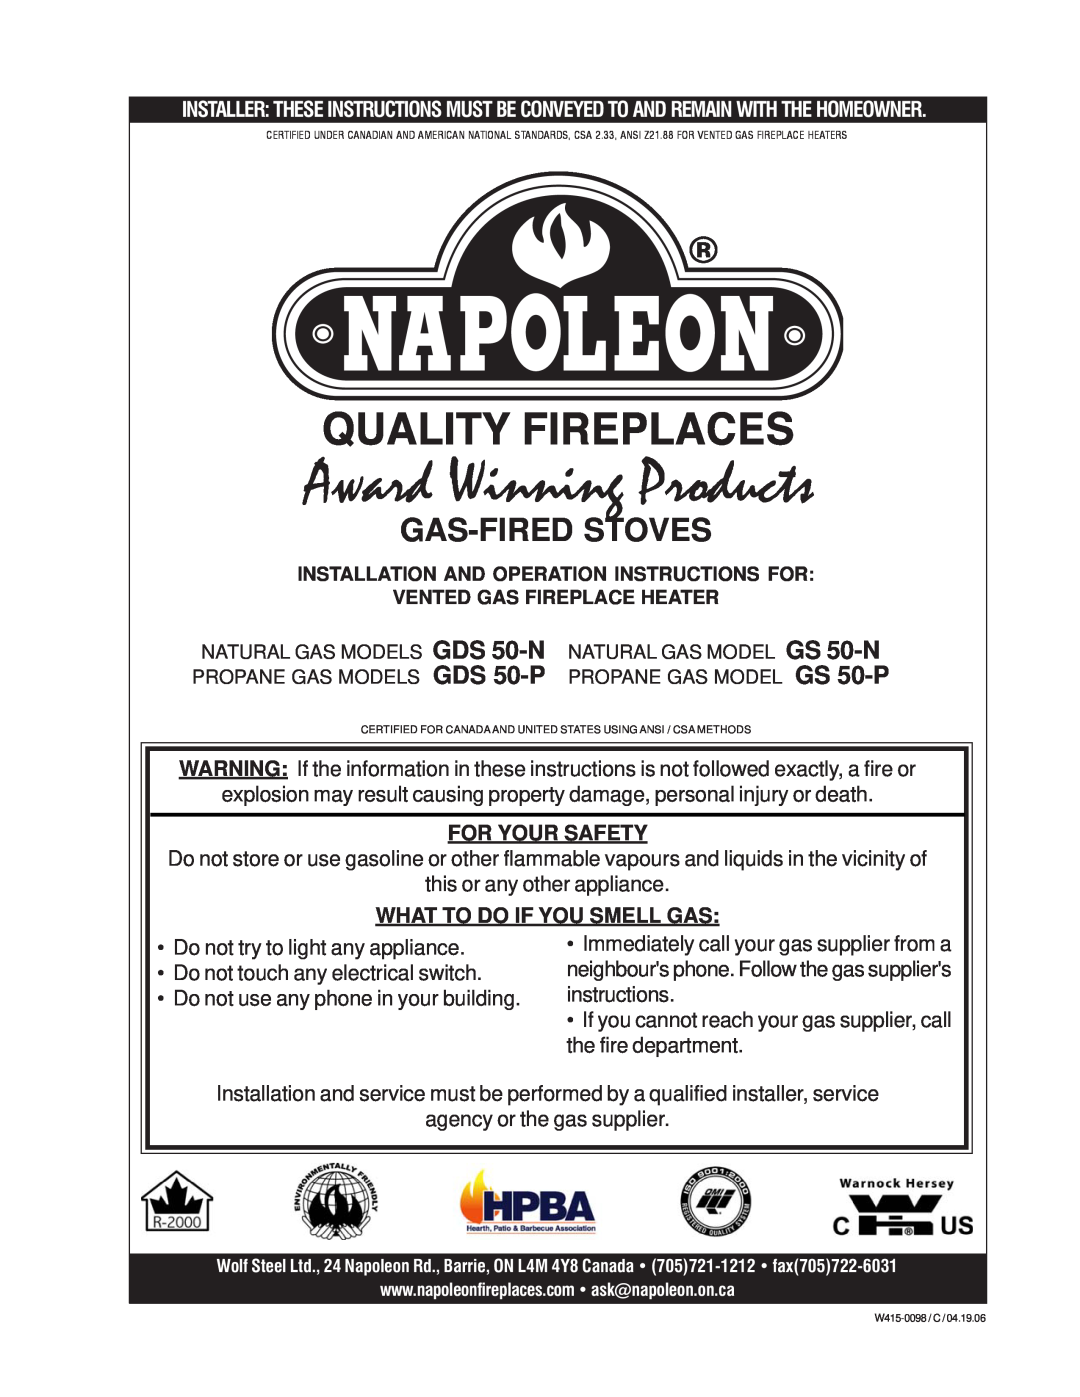 Napoleon Fireplaces GDS 50-P manual For Your Safety, What To Do If You Smell Gas, Gas-Firedstoves, GS 50-NGS 50-P 